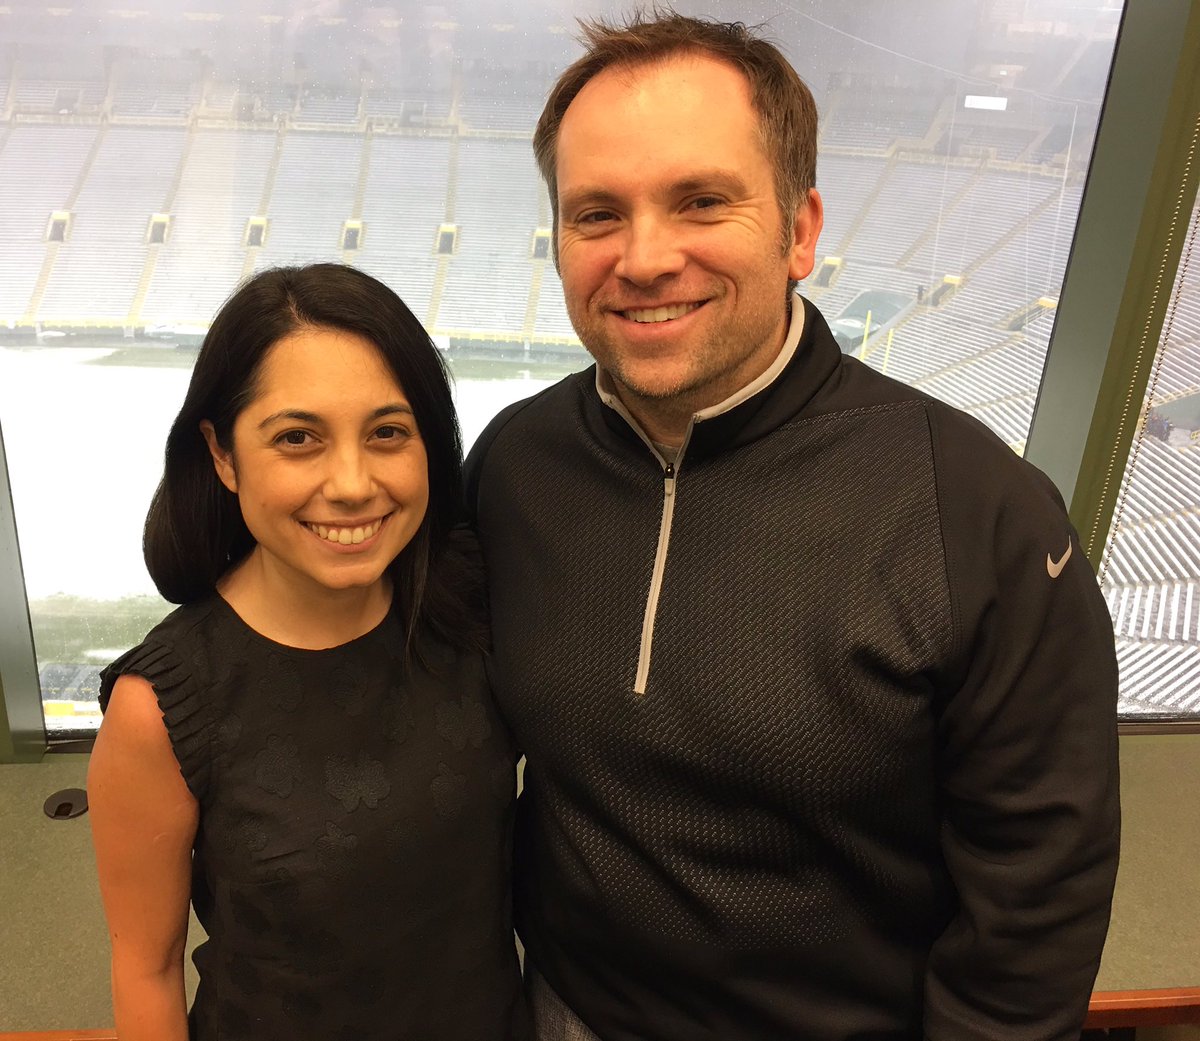 Sarah Barshop on Twitter: "It was awesome to cover the game with  @jasonjwilde today. I wouldn't have this job without him as a mentor and  friend.… https://t.co/pmKPcENoyY"